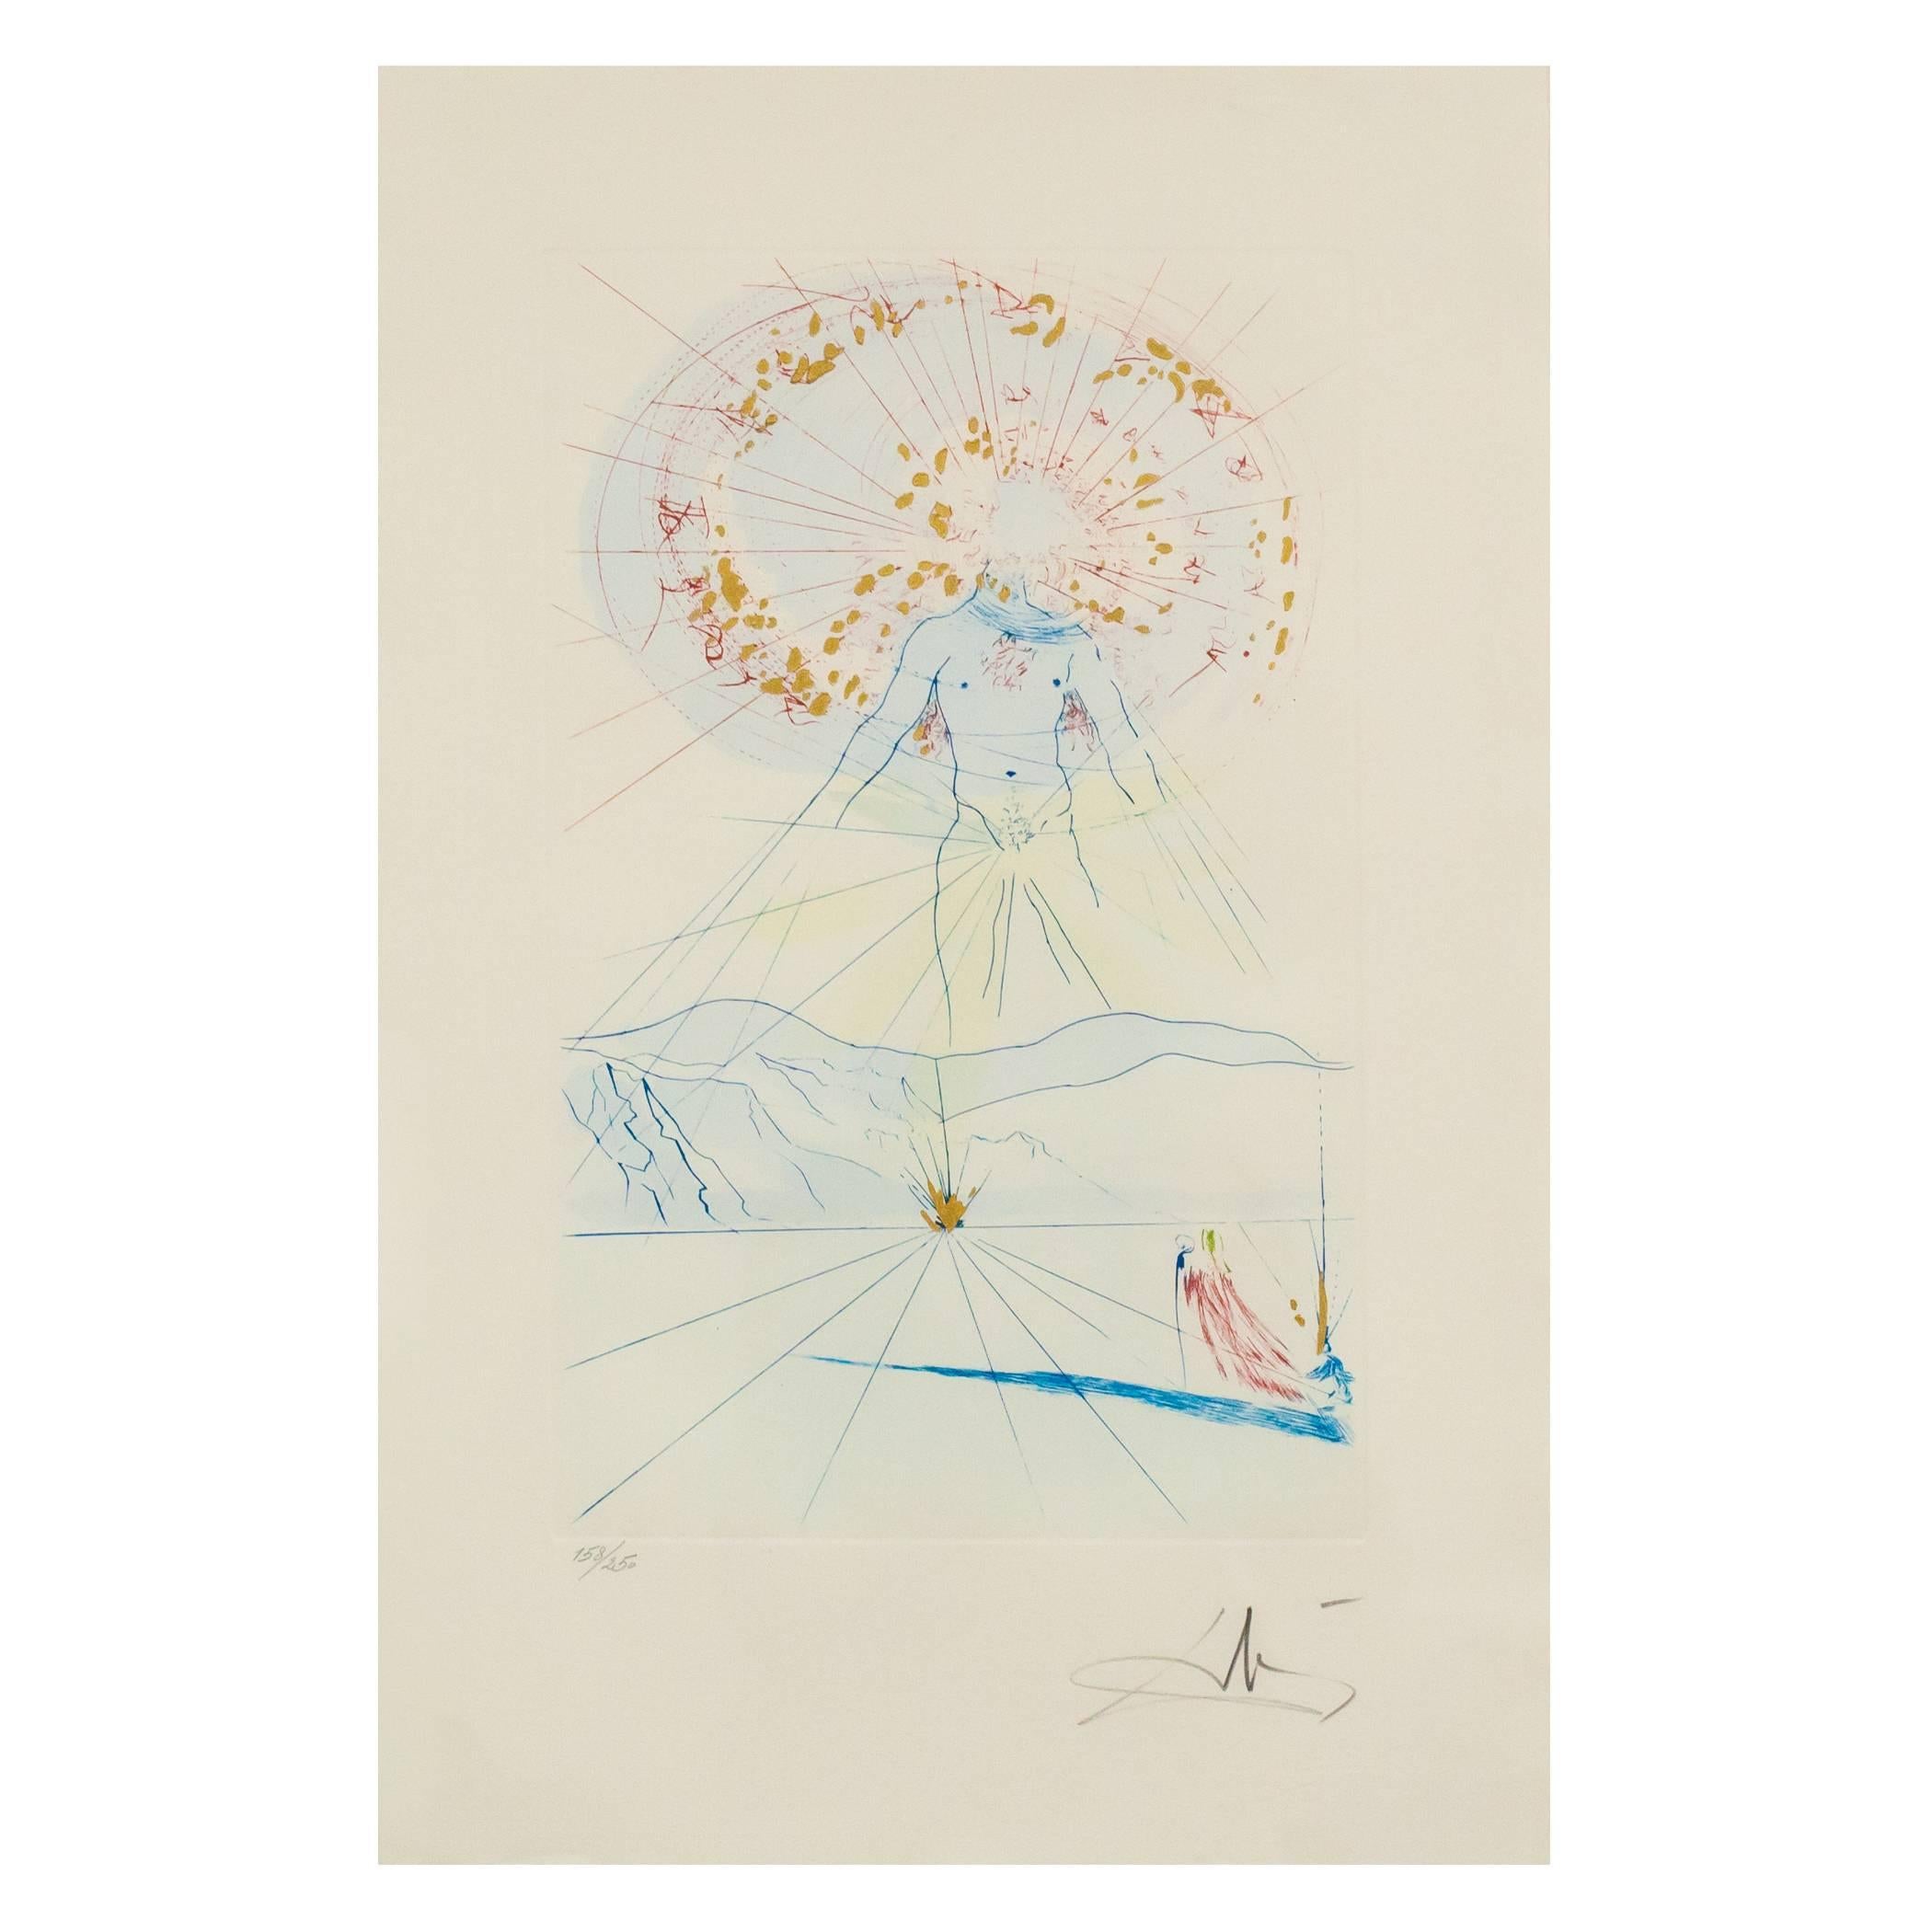 Salvador Dalí Figurative Print - "BRIDEGROOM LEAPS UPON THE MOUNTAINS" 